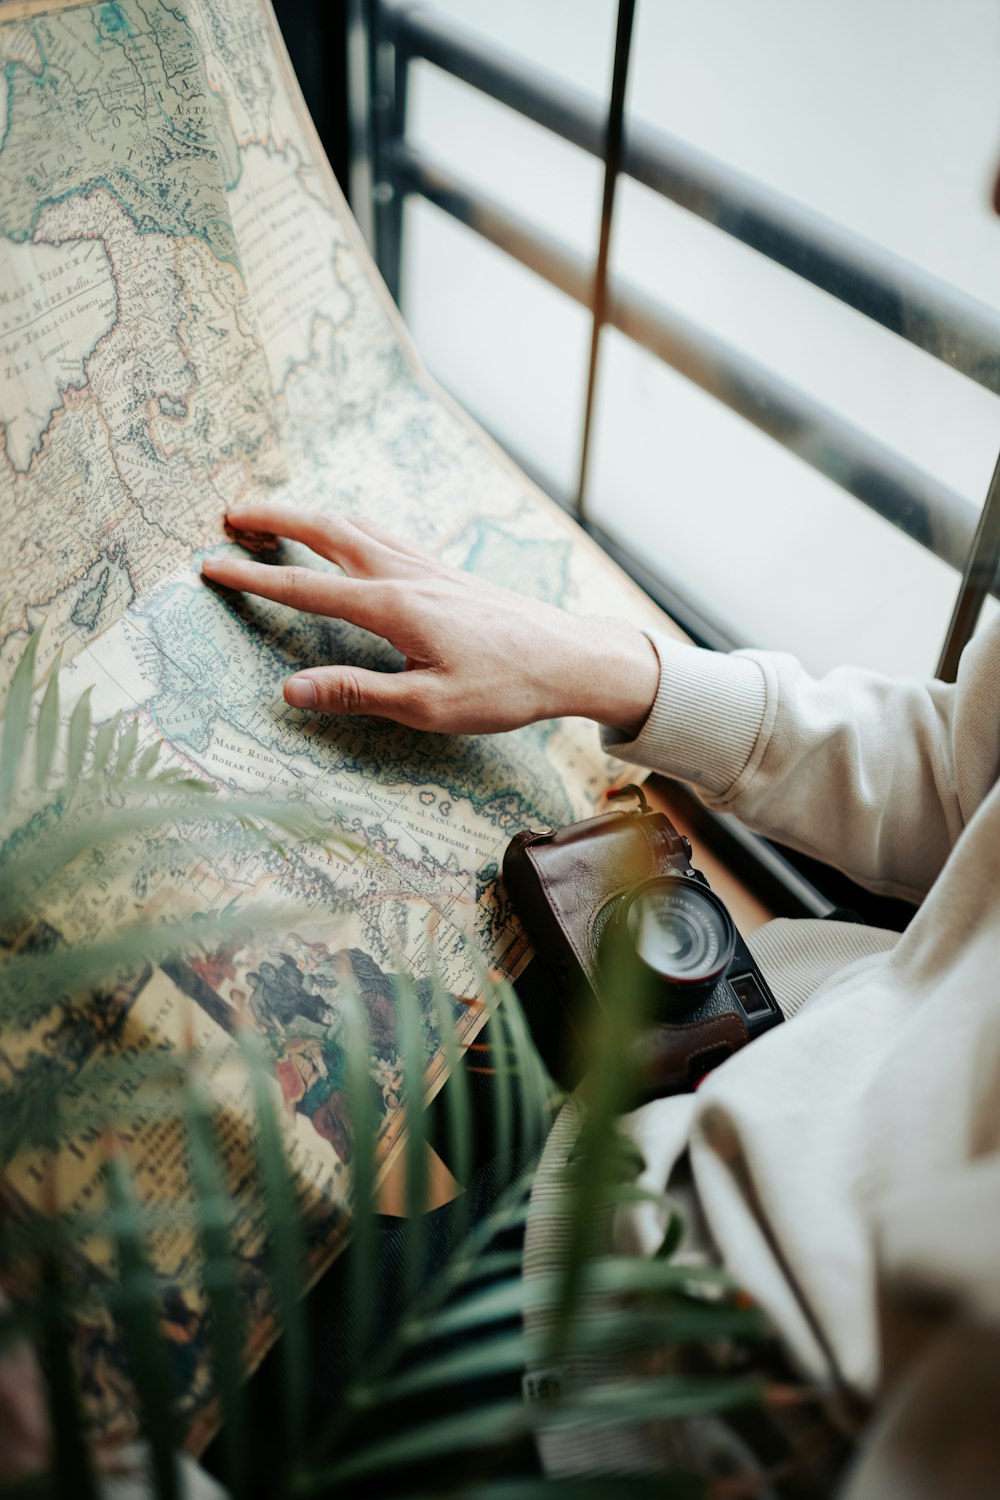 a person's hand resting on a map on a chair